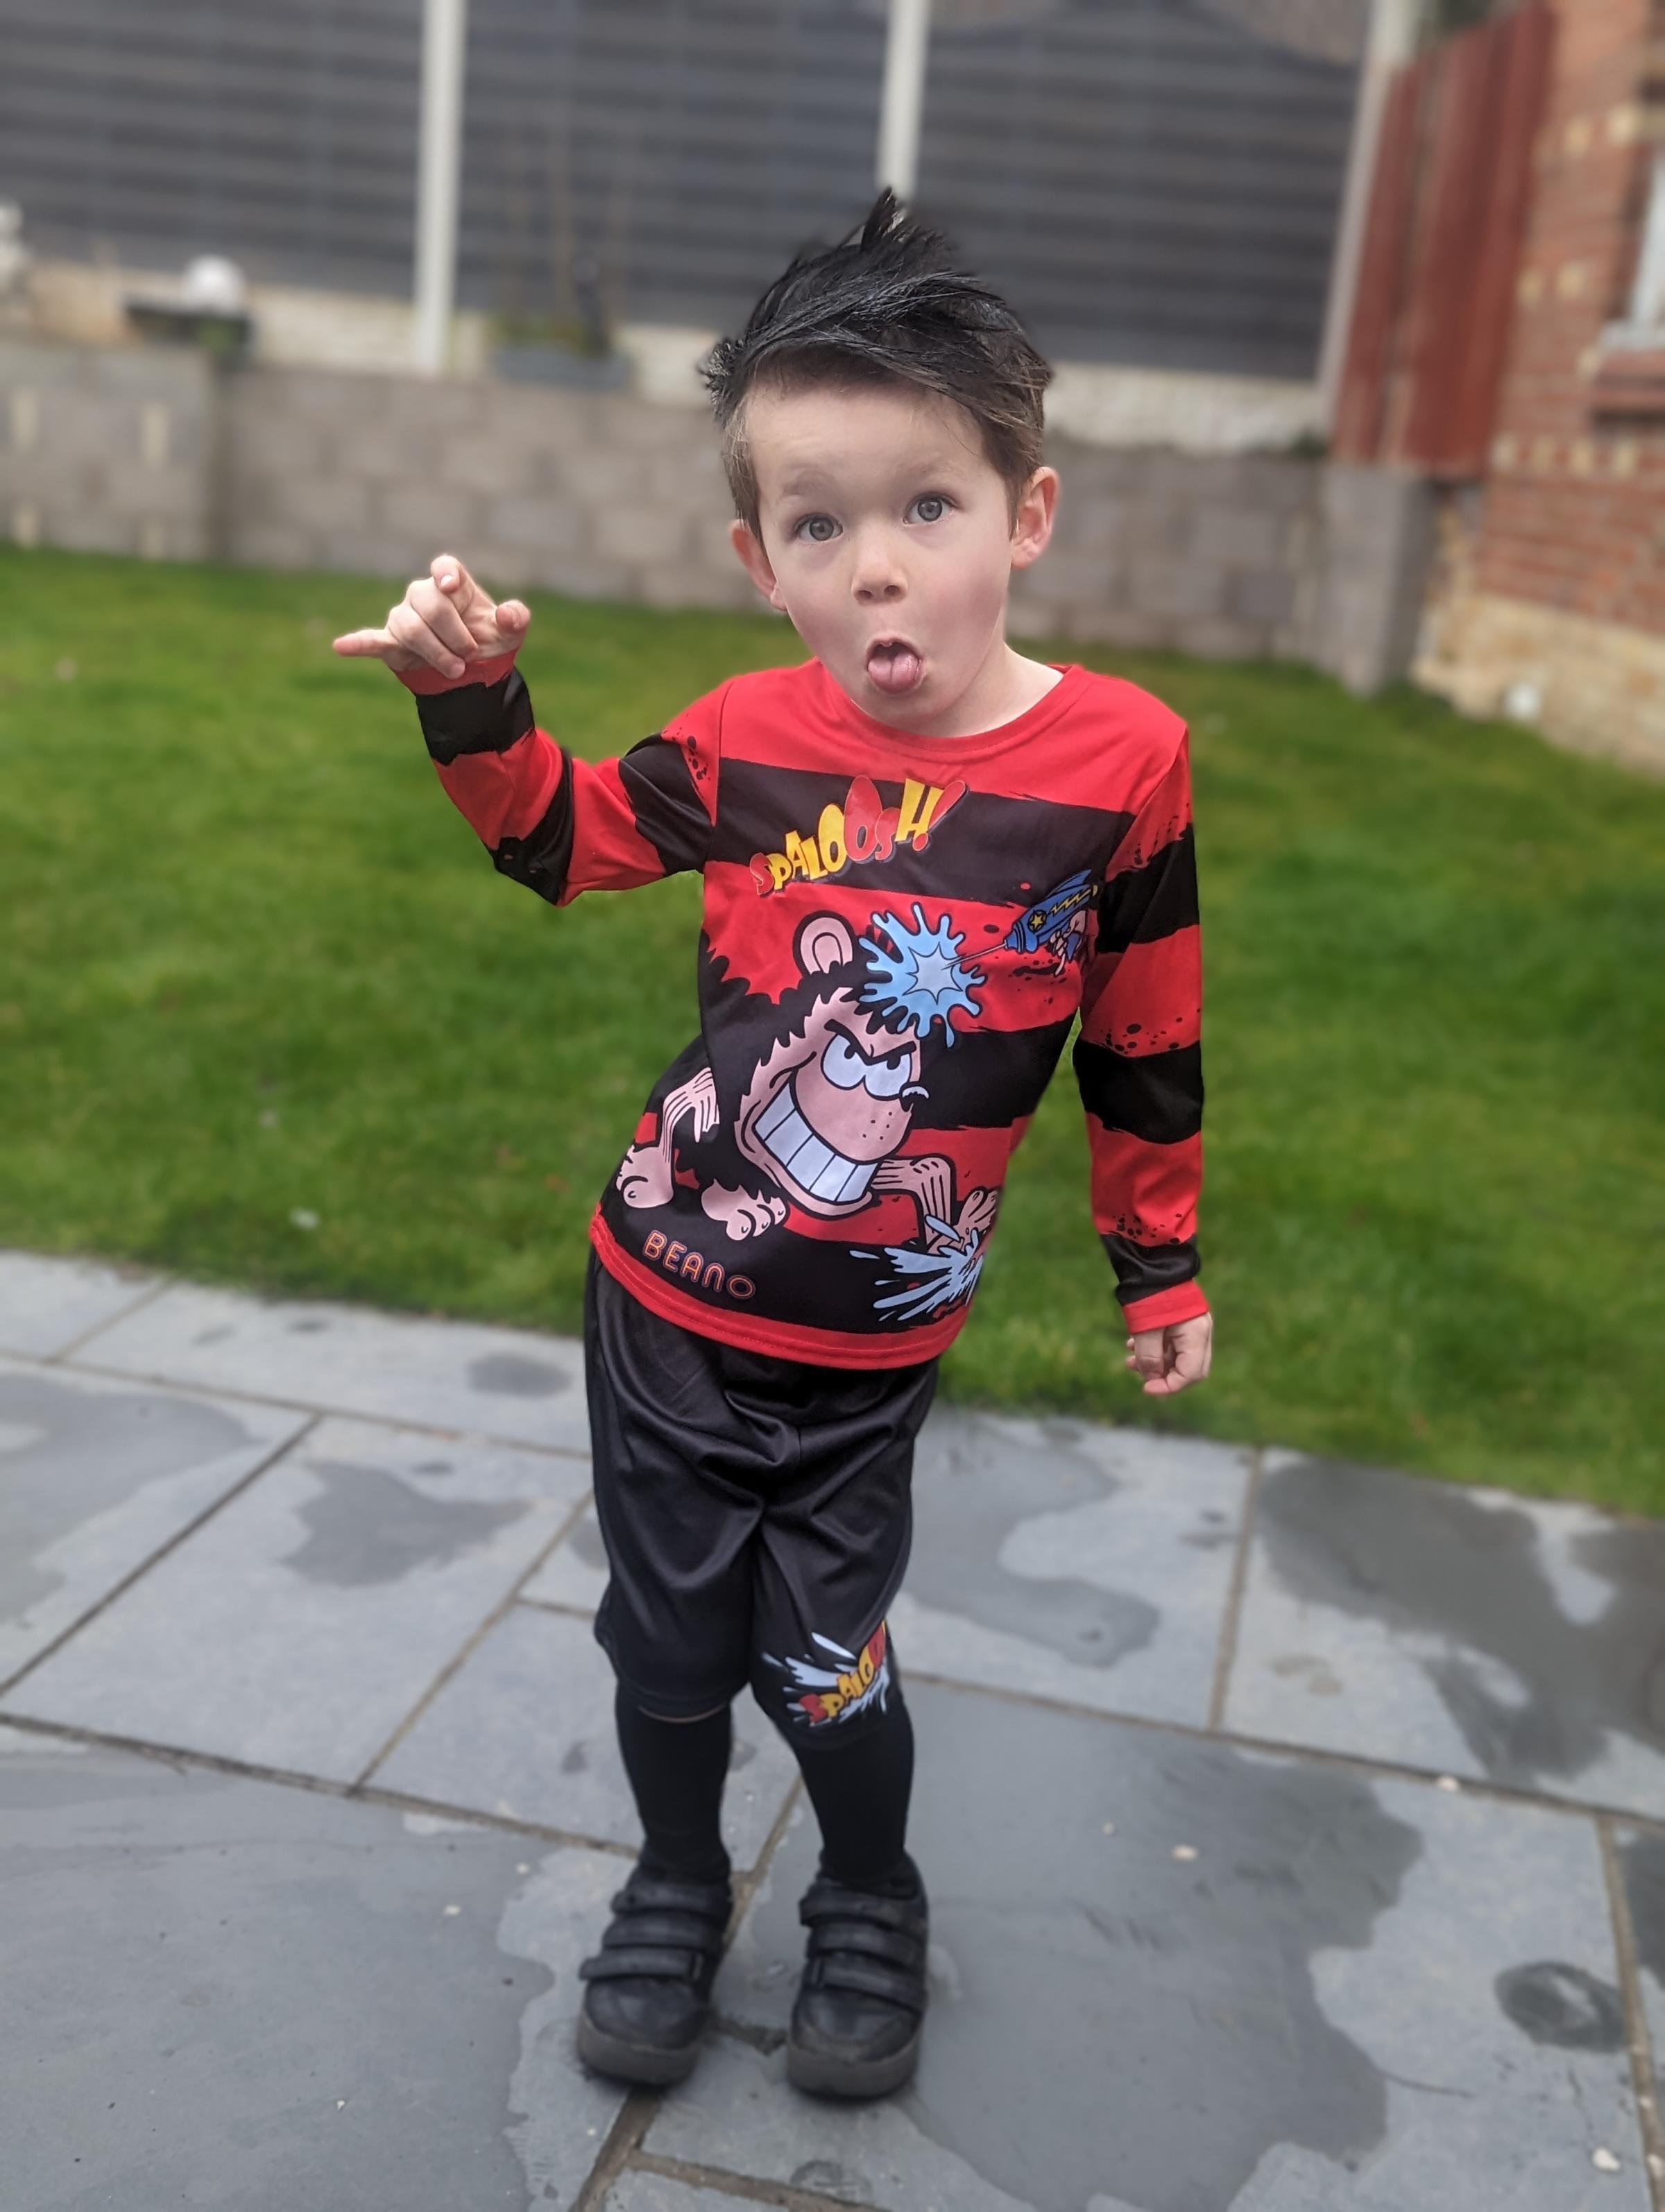 Rachel Grealy, from Wrexham: Son George Grealy as Dennis the Menace.